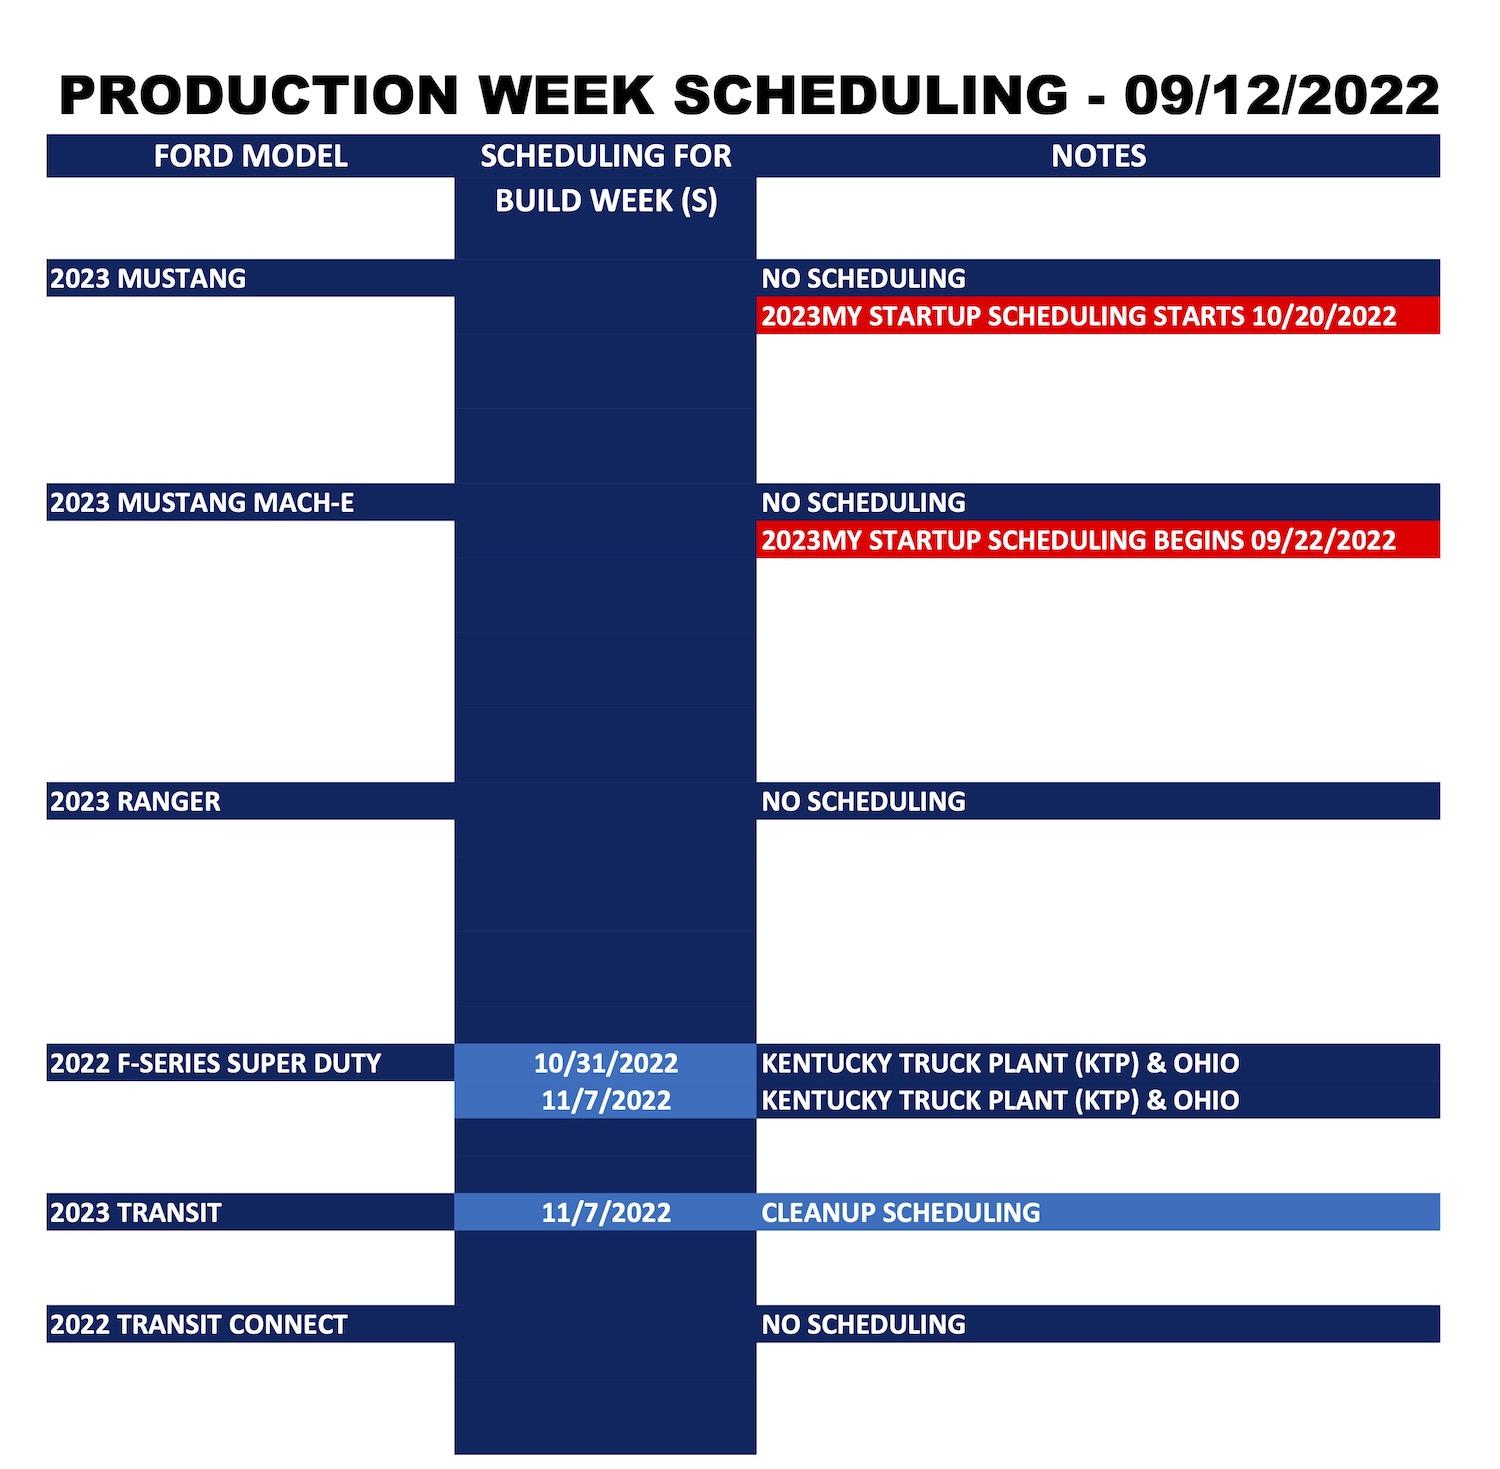 Ford F-150 Lightning ⏰ F-150 Lightning Scheduling This Week (9/12) For Build Week 10/12 Ford_Forums_Production Week Scheduling_2022-09-12_2